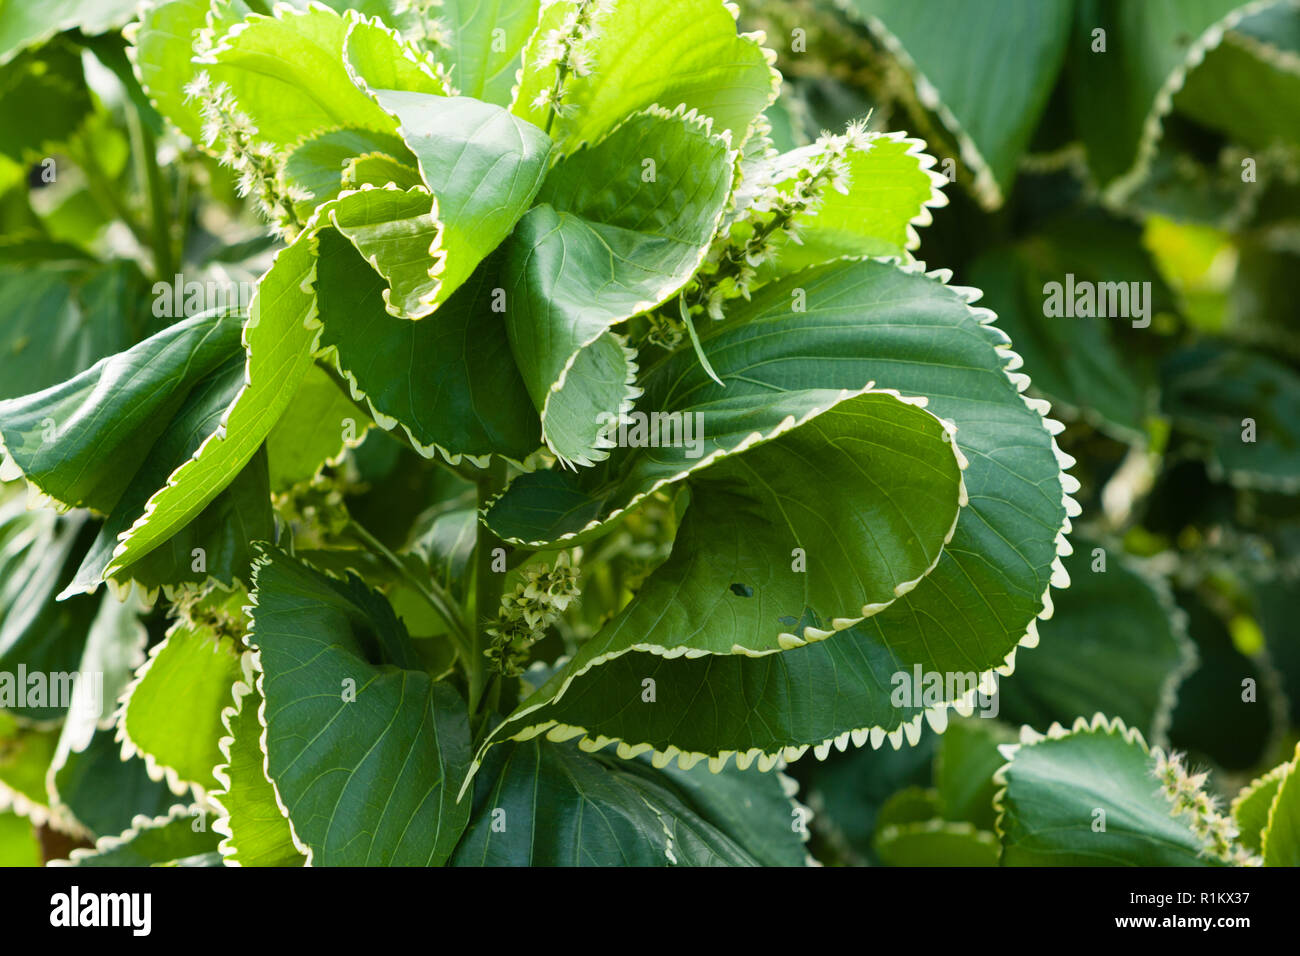 Copperleaf (Acalypha wilkesiana), a.k.a. Jacob’s coat, green with white edged leaves foliage, Hualien, Taiwan Stock Photo